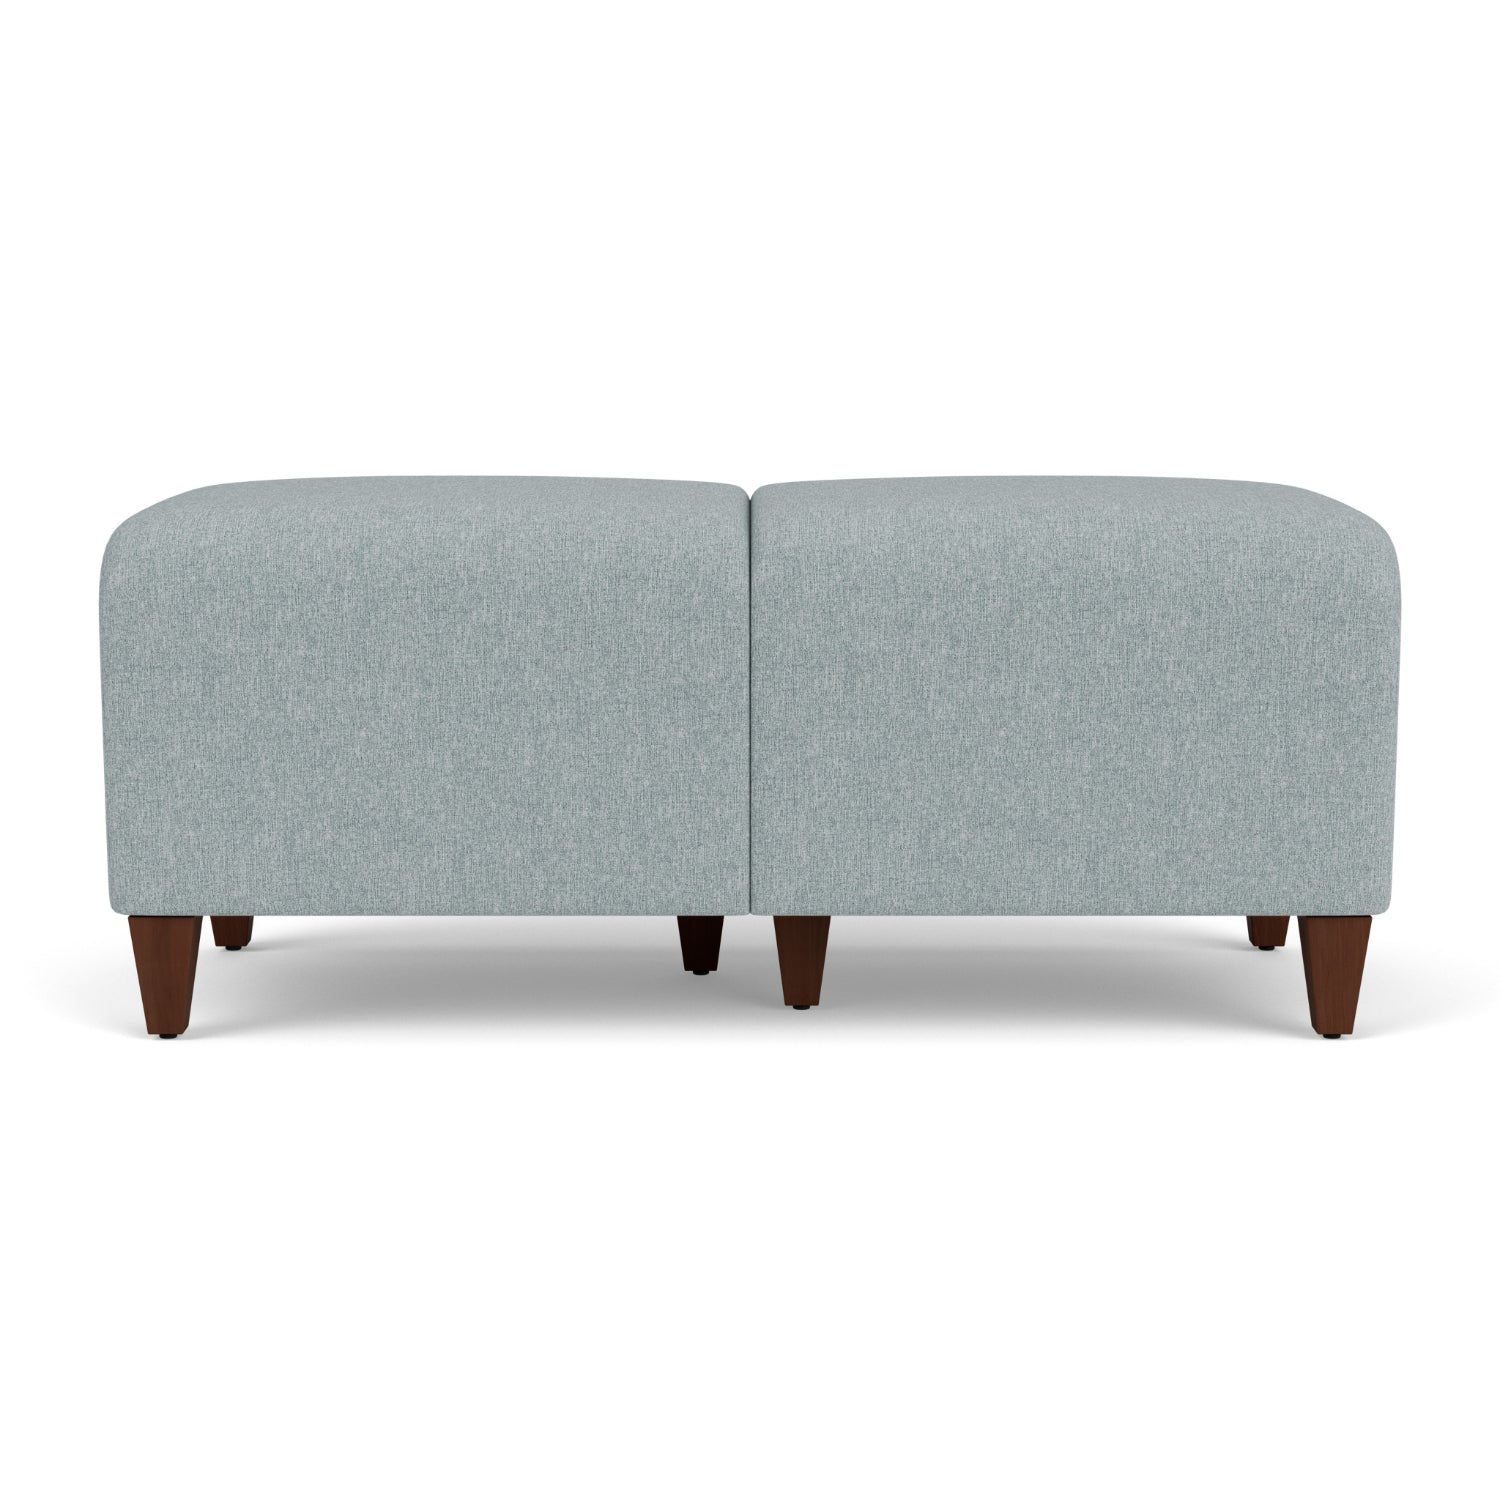 Siena Collection Reception Seating, 2-Seat Bench, Healthcare Vinyl Upholstery, FREE SHIPPING